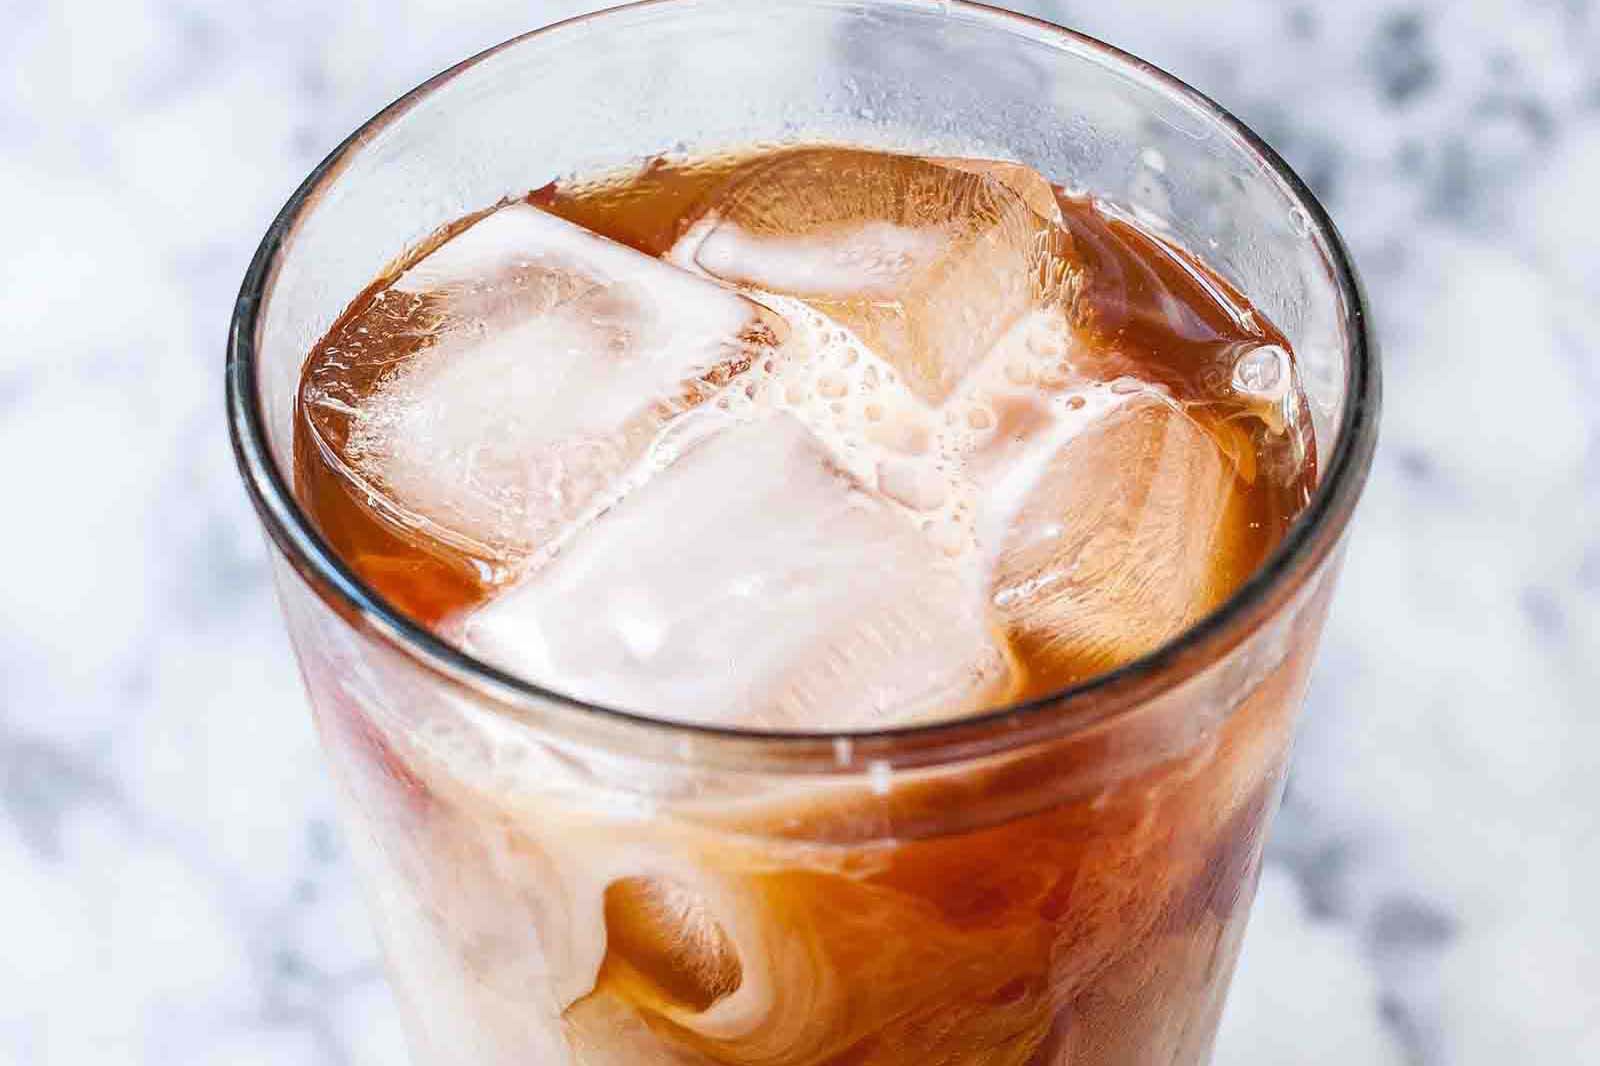 How to make cold brew coffee?